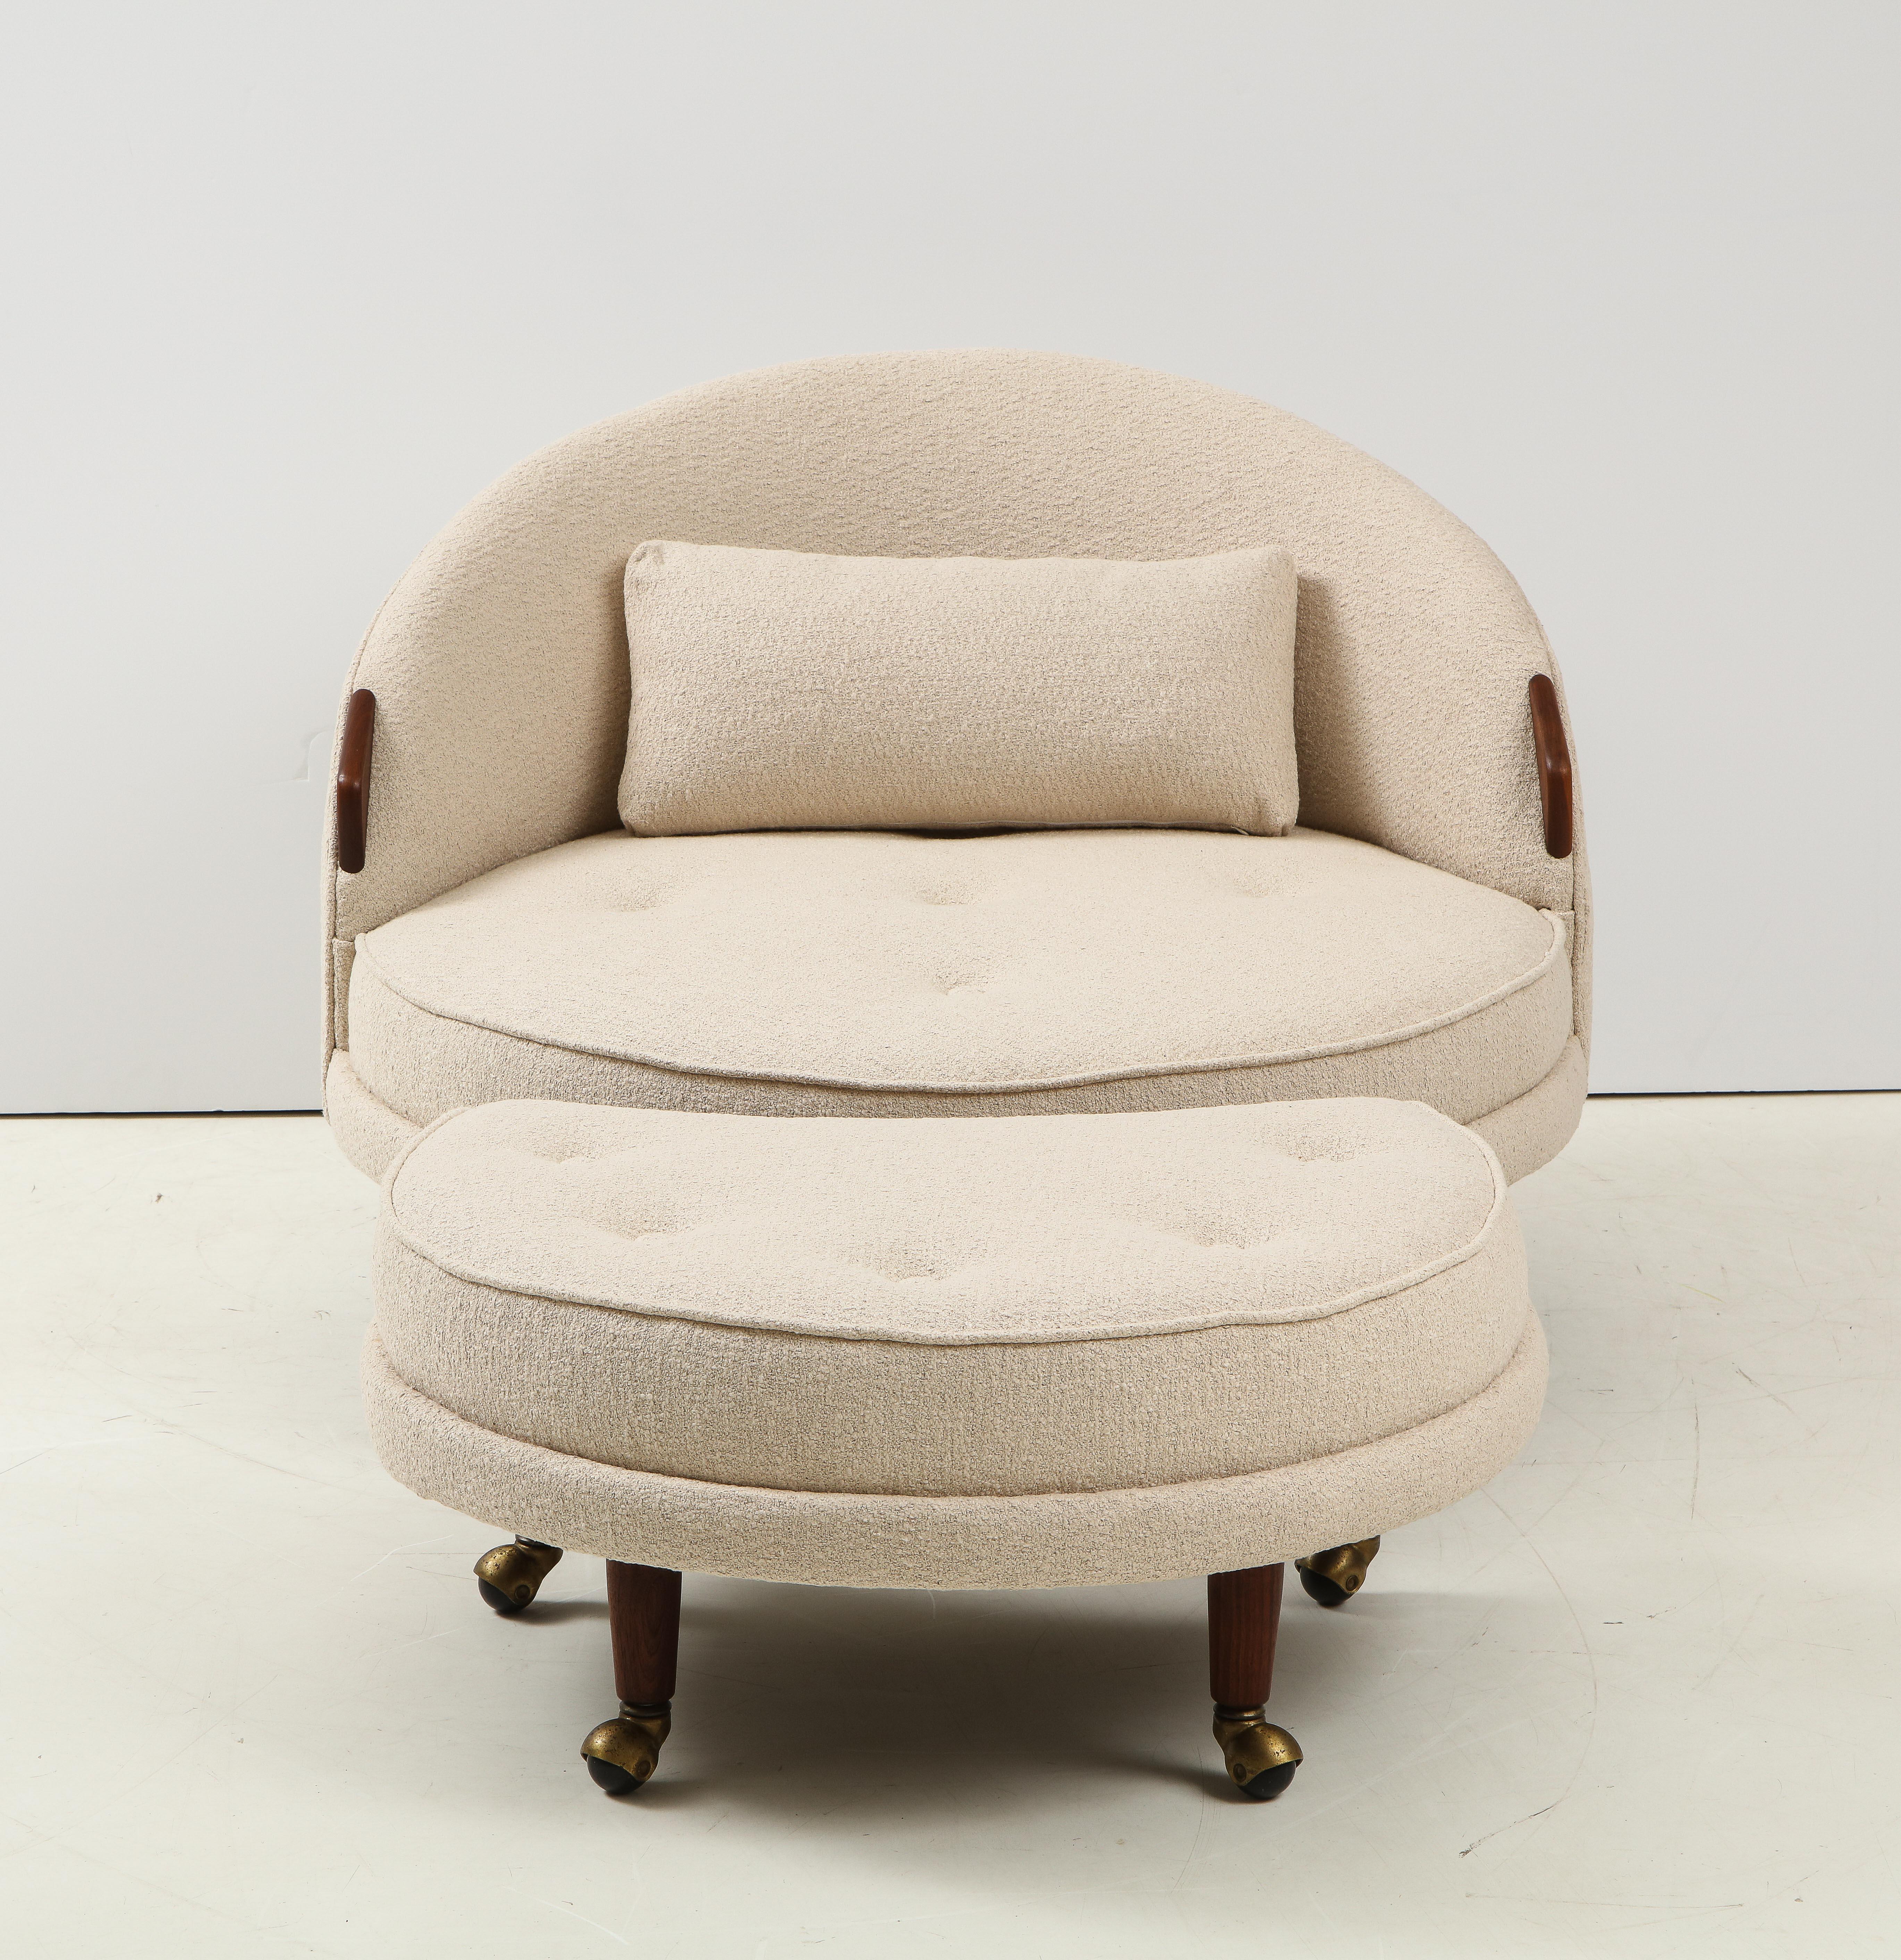 Stunning 1960s Adrian Pearsall designed for Craft Associates 